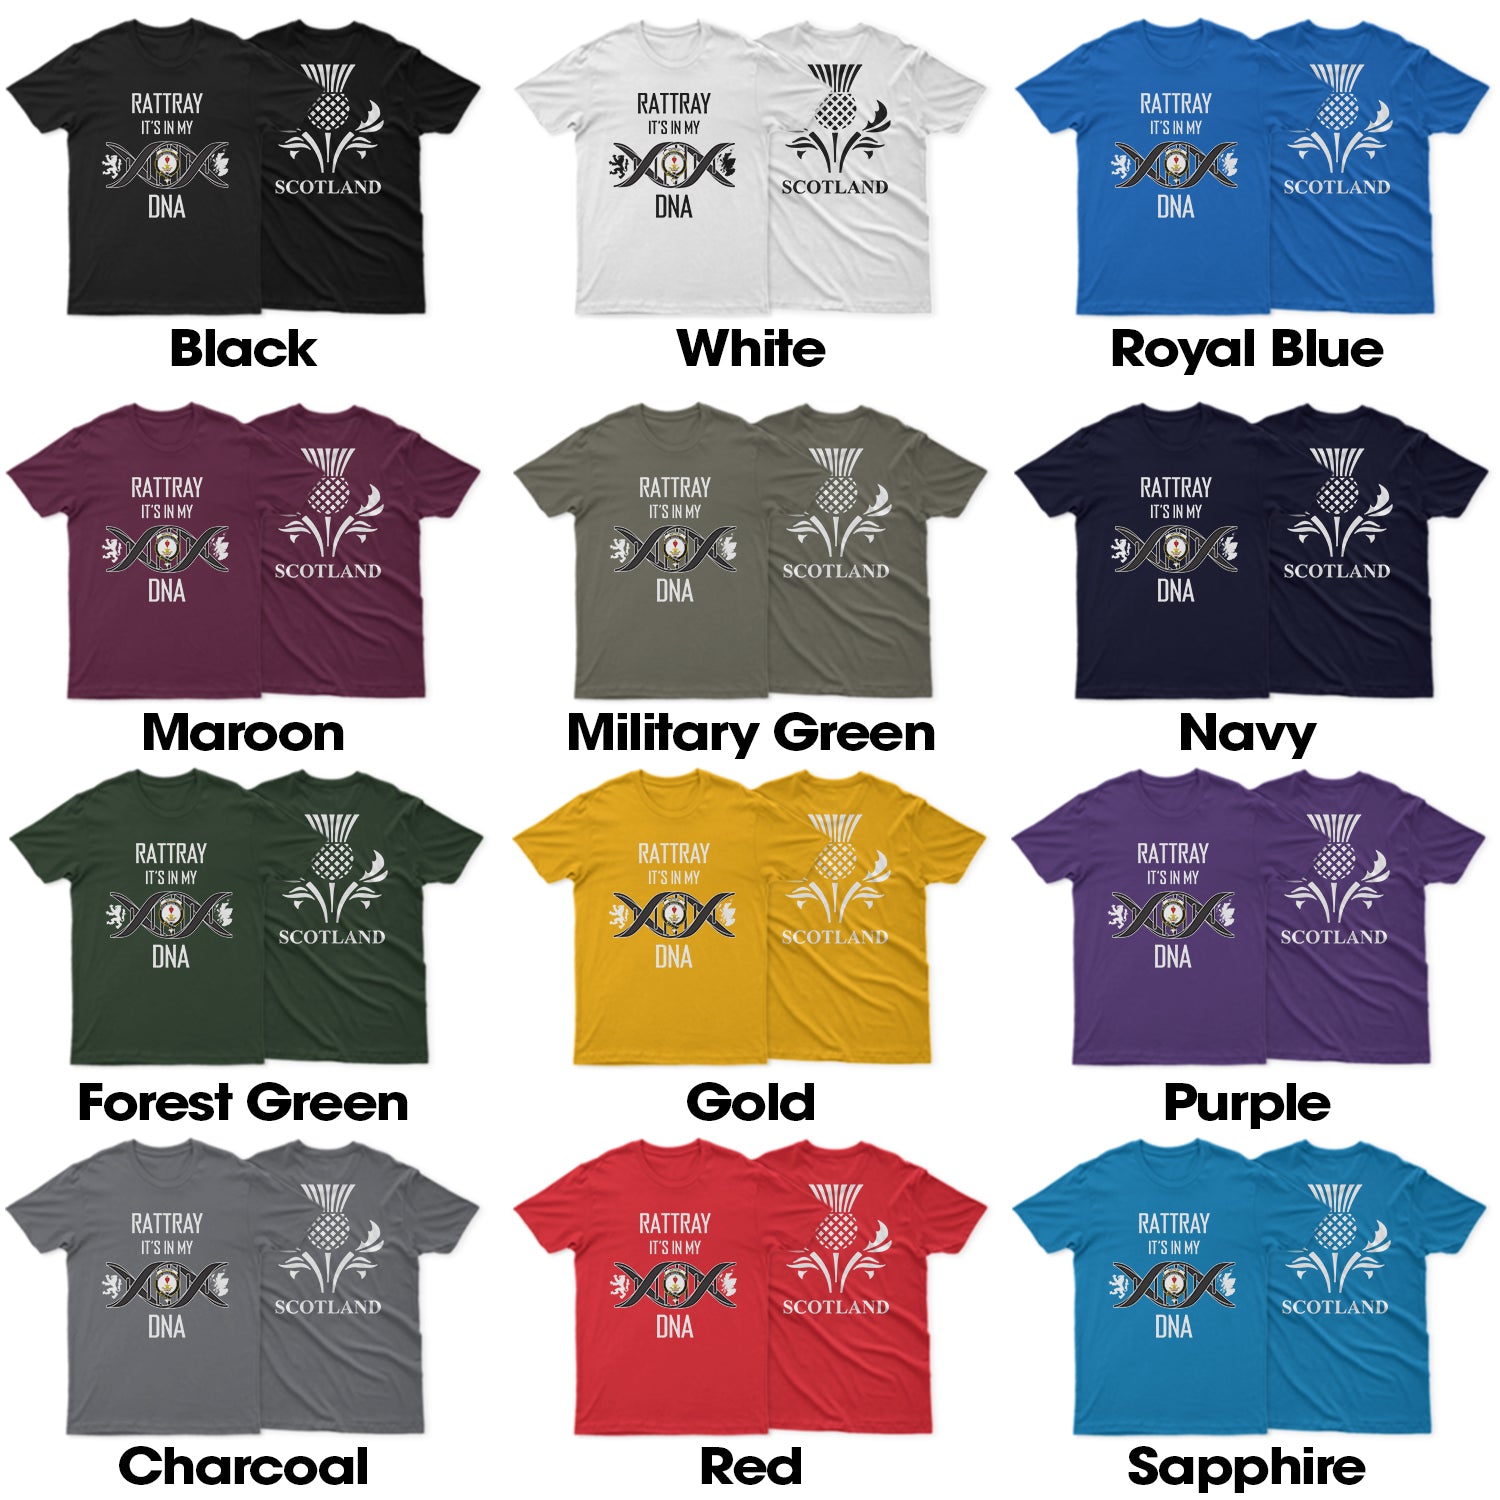 rattray-family-crest-dna-in-me-mens-t-shirt